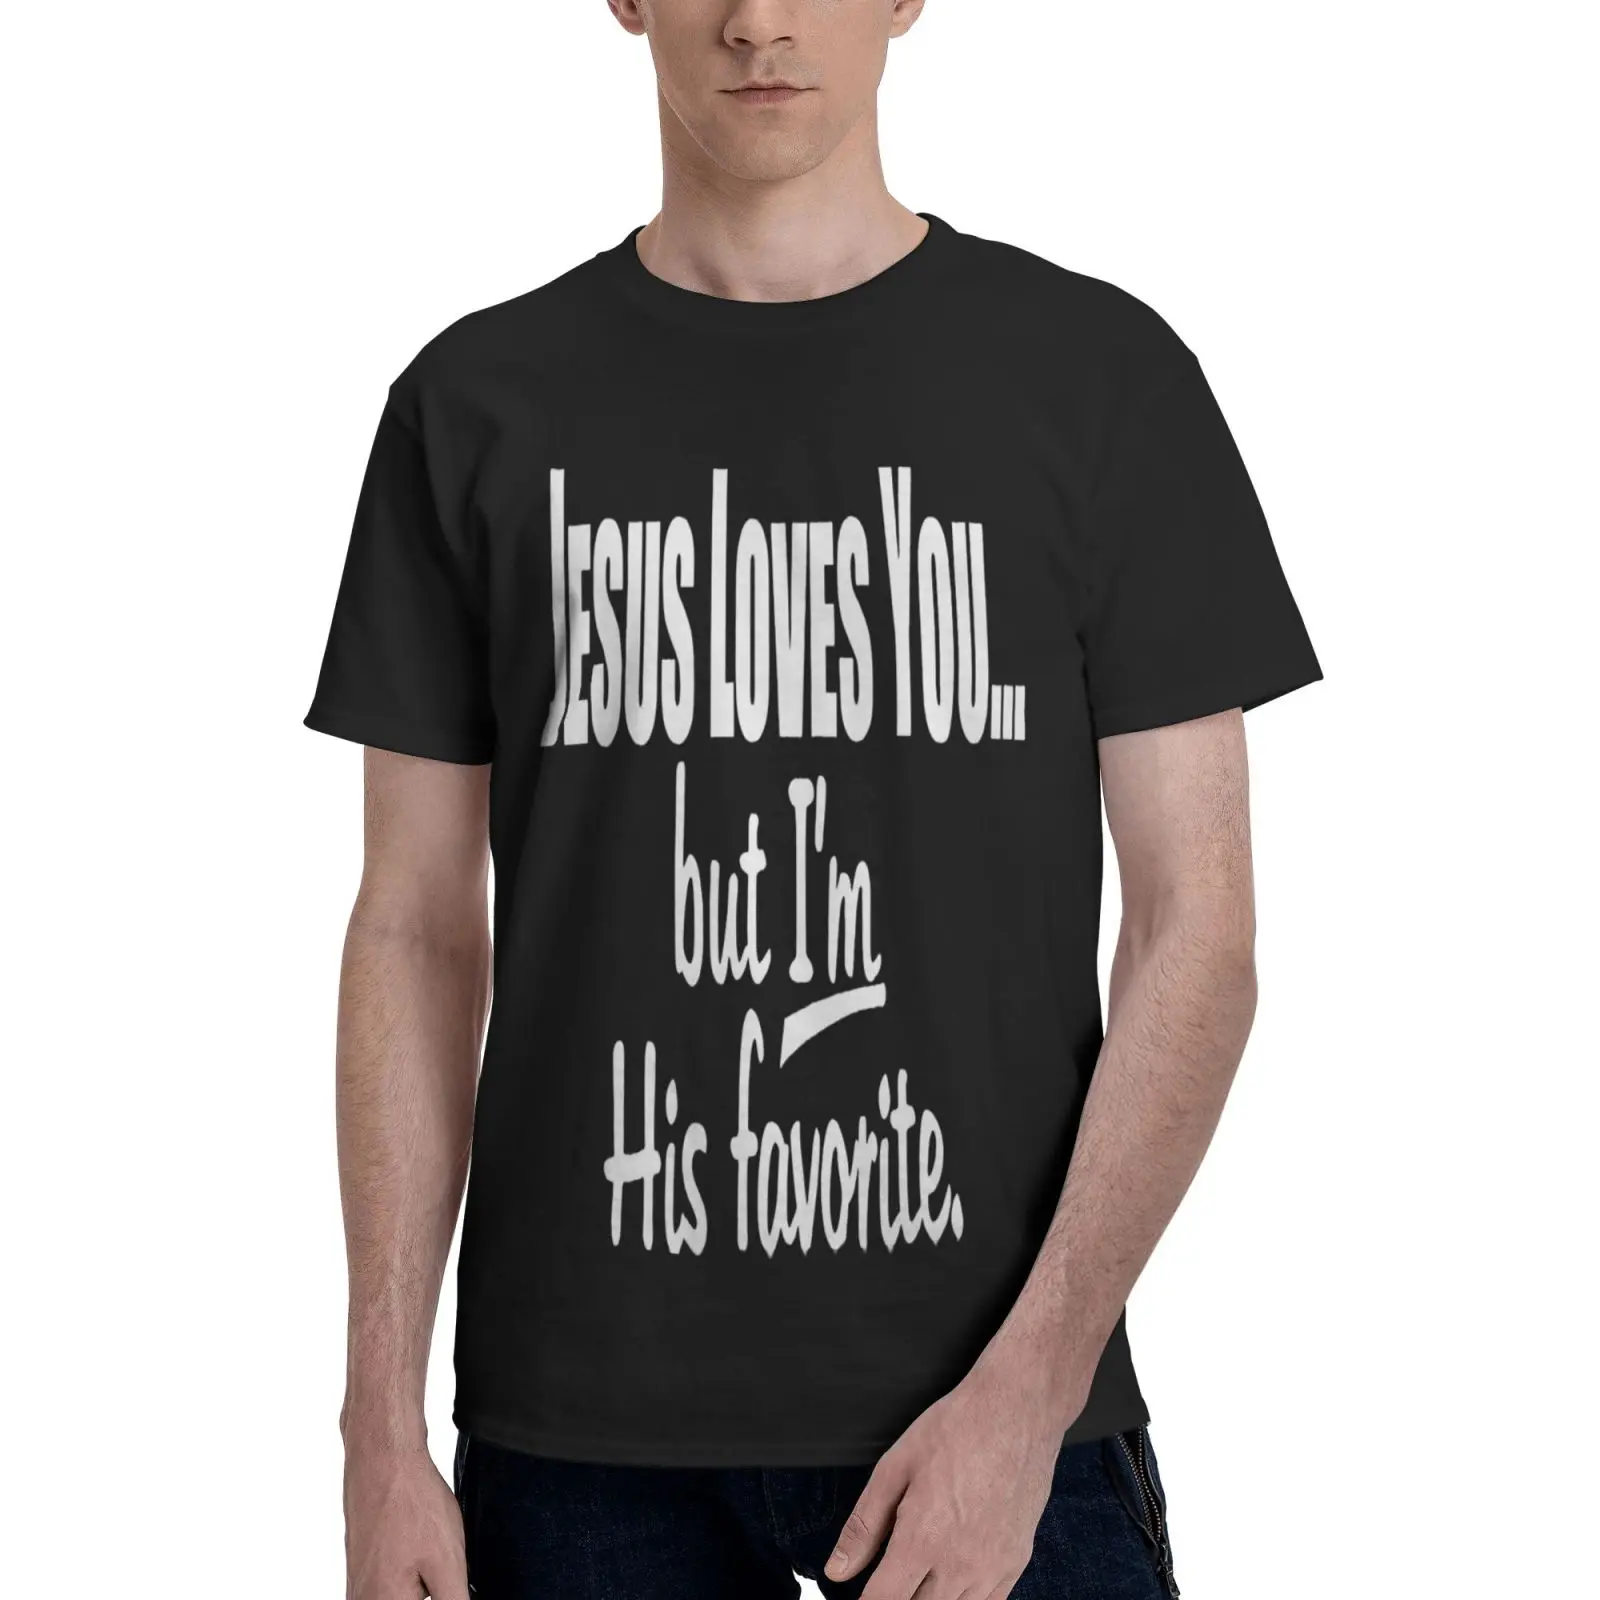 

Jesus Loves You But Im His 6192 T Shirt Oversize T-Shirt Tshirt T-Shirt Men's Shirts Men's T-Shirts Oversize T-Shirts Clothing